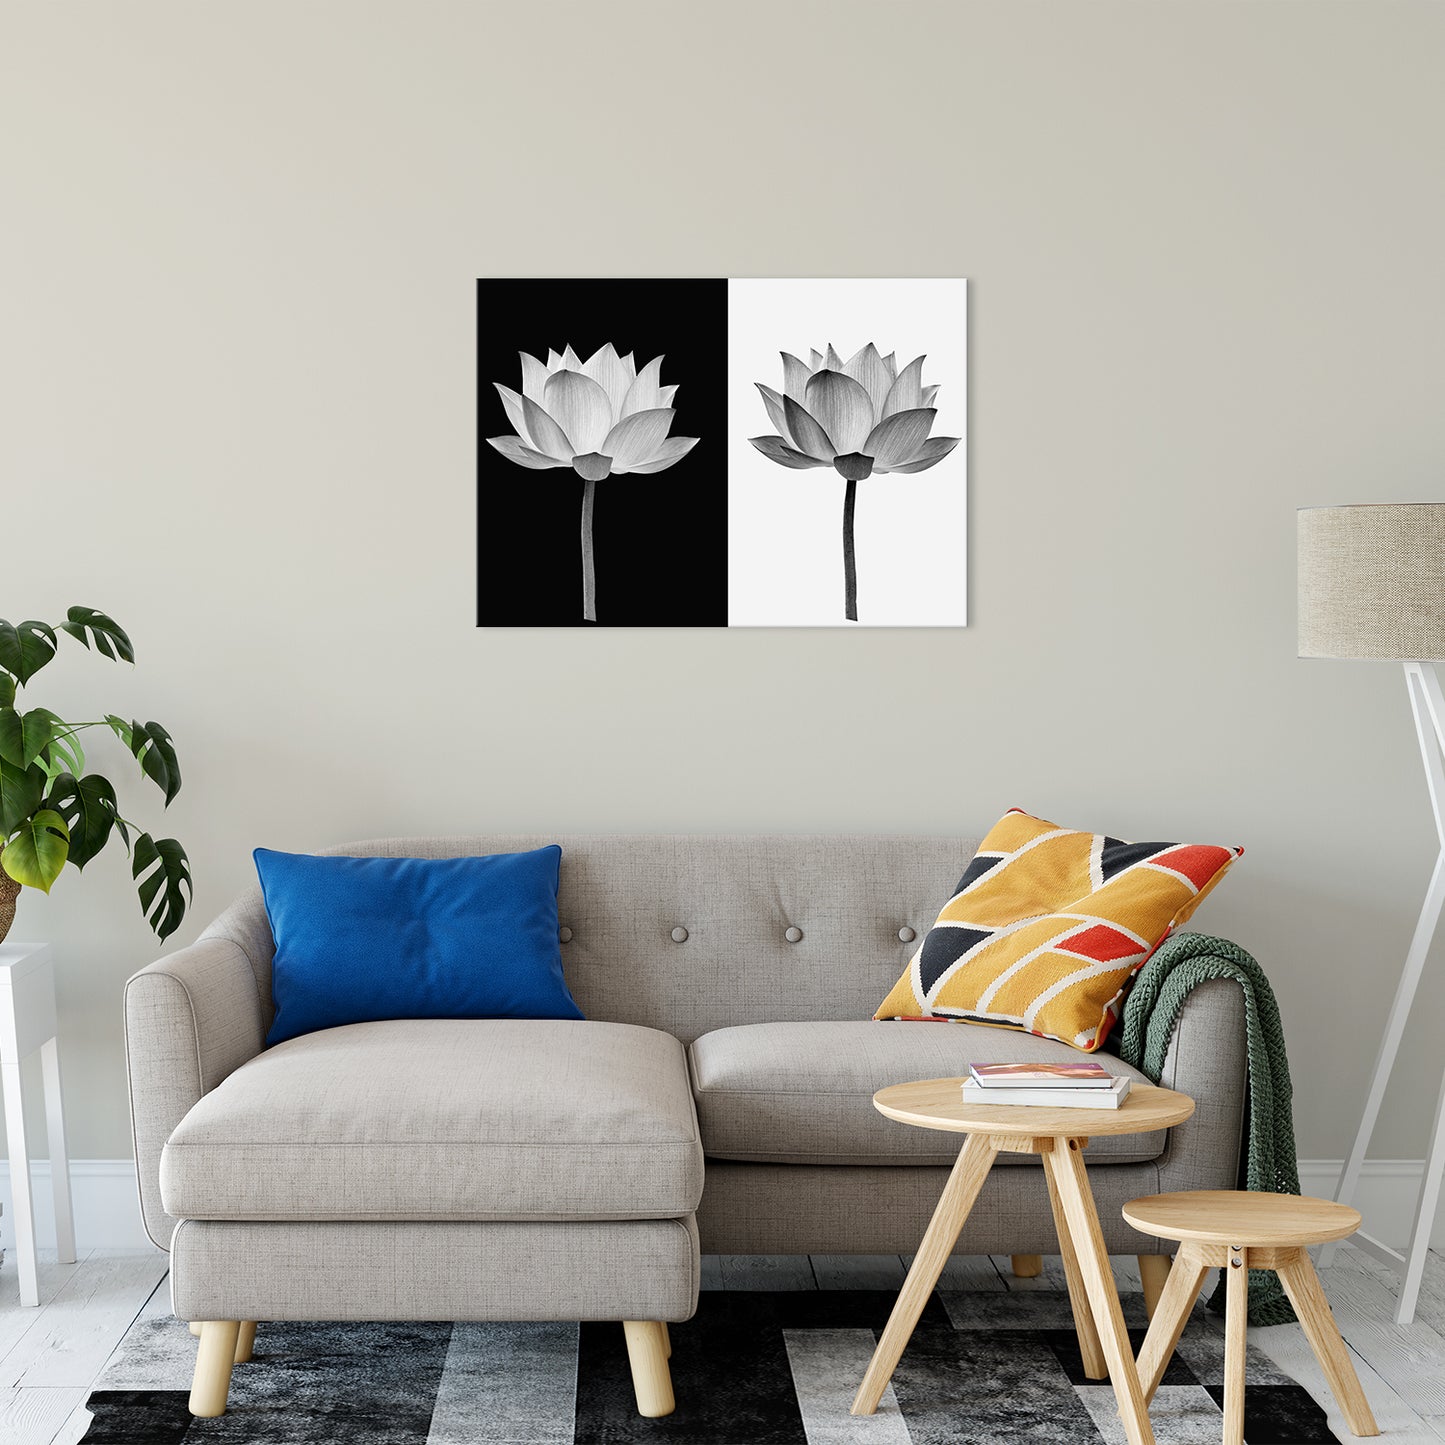 Lotus Flower on Black and White Background Floral Nature Photo Fine Art Canvas Print 24" x 36" - PIPAFINEART